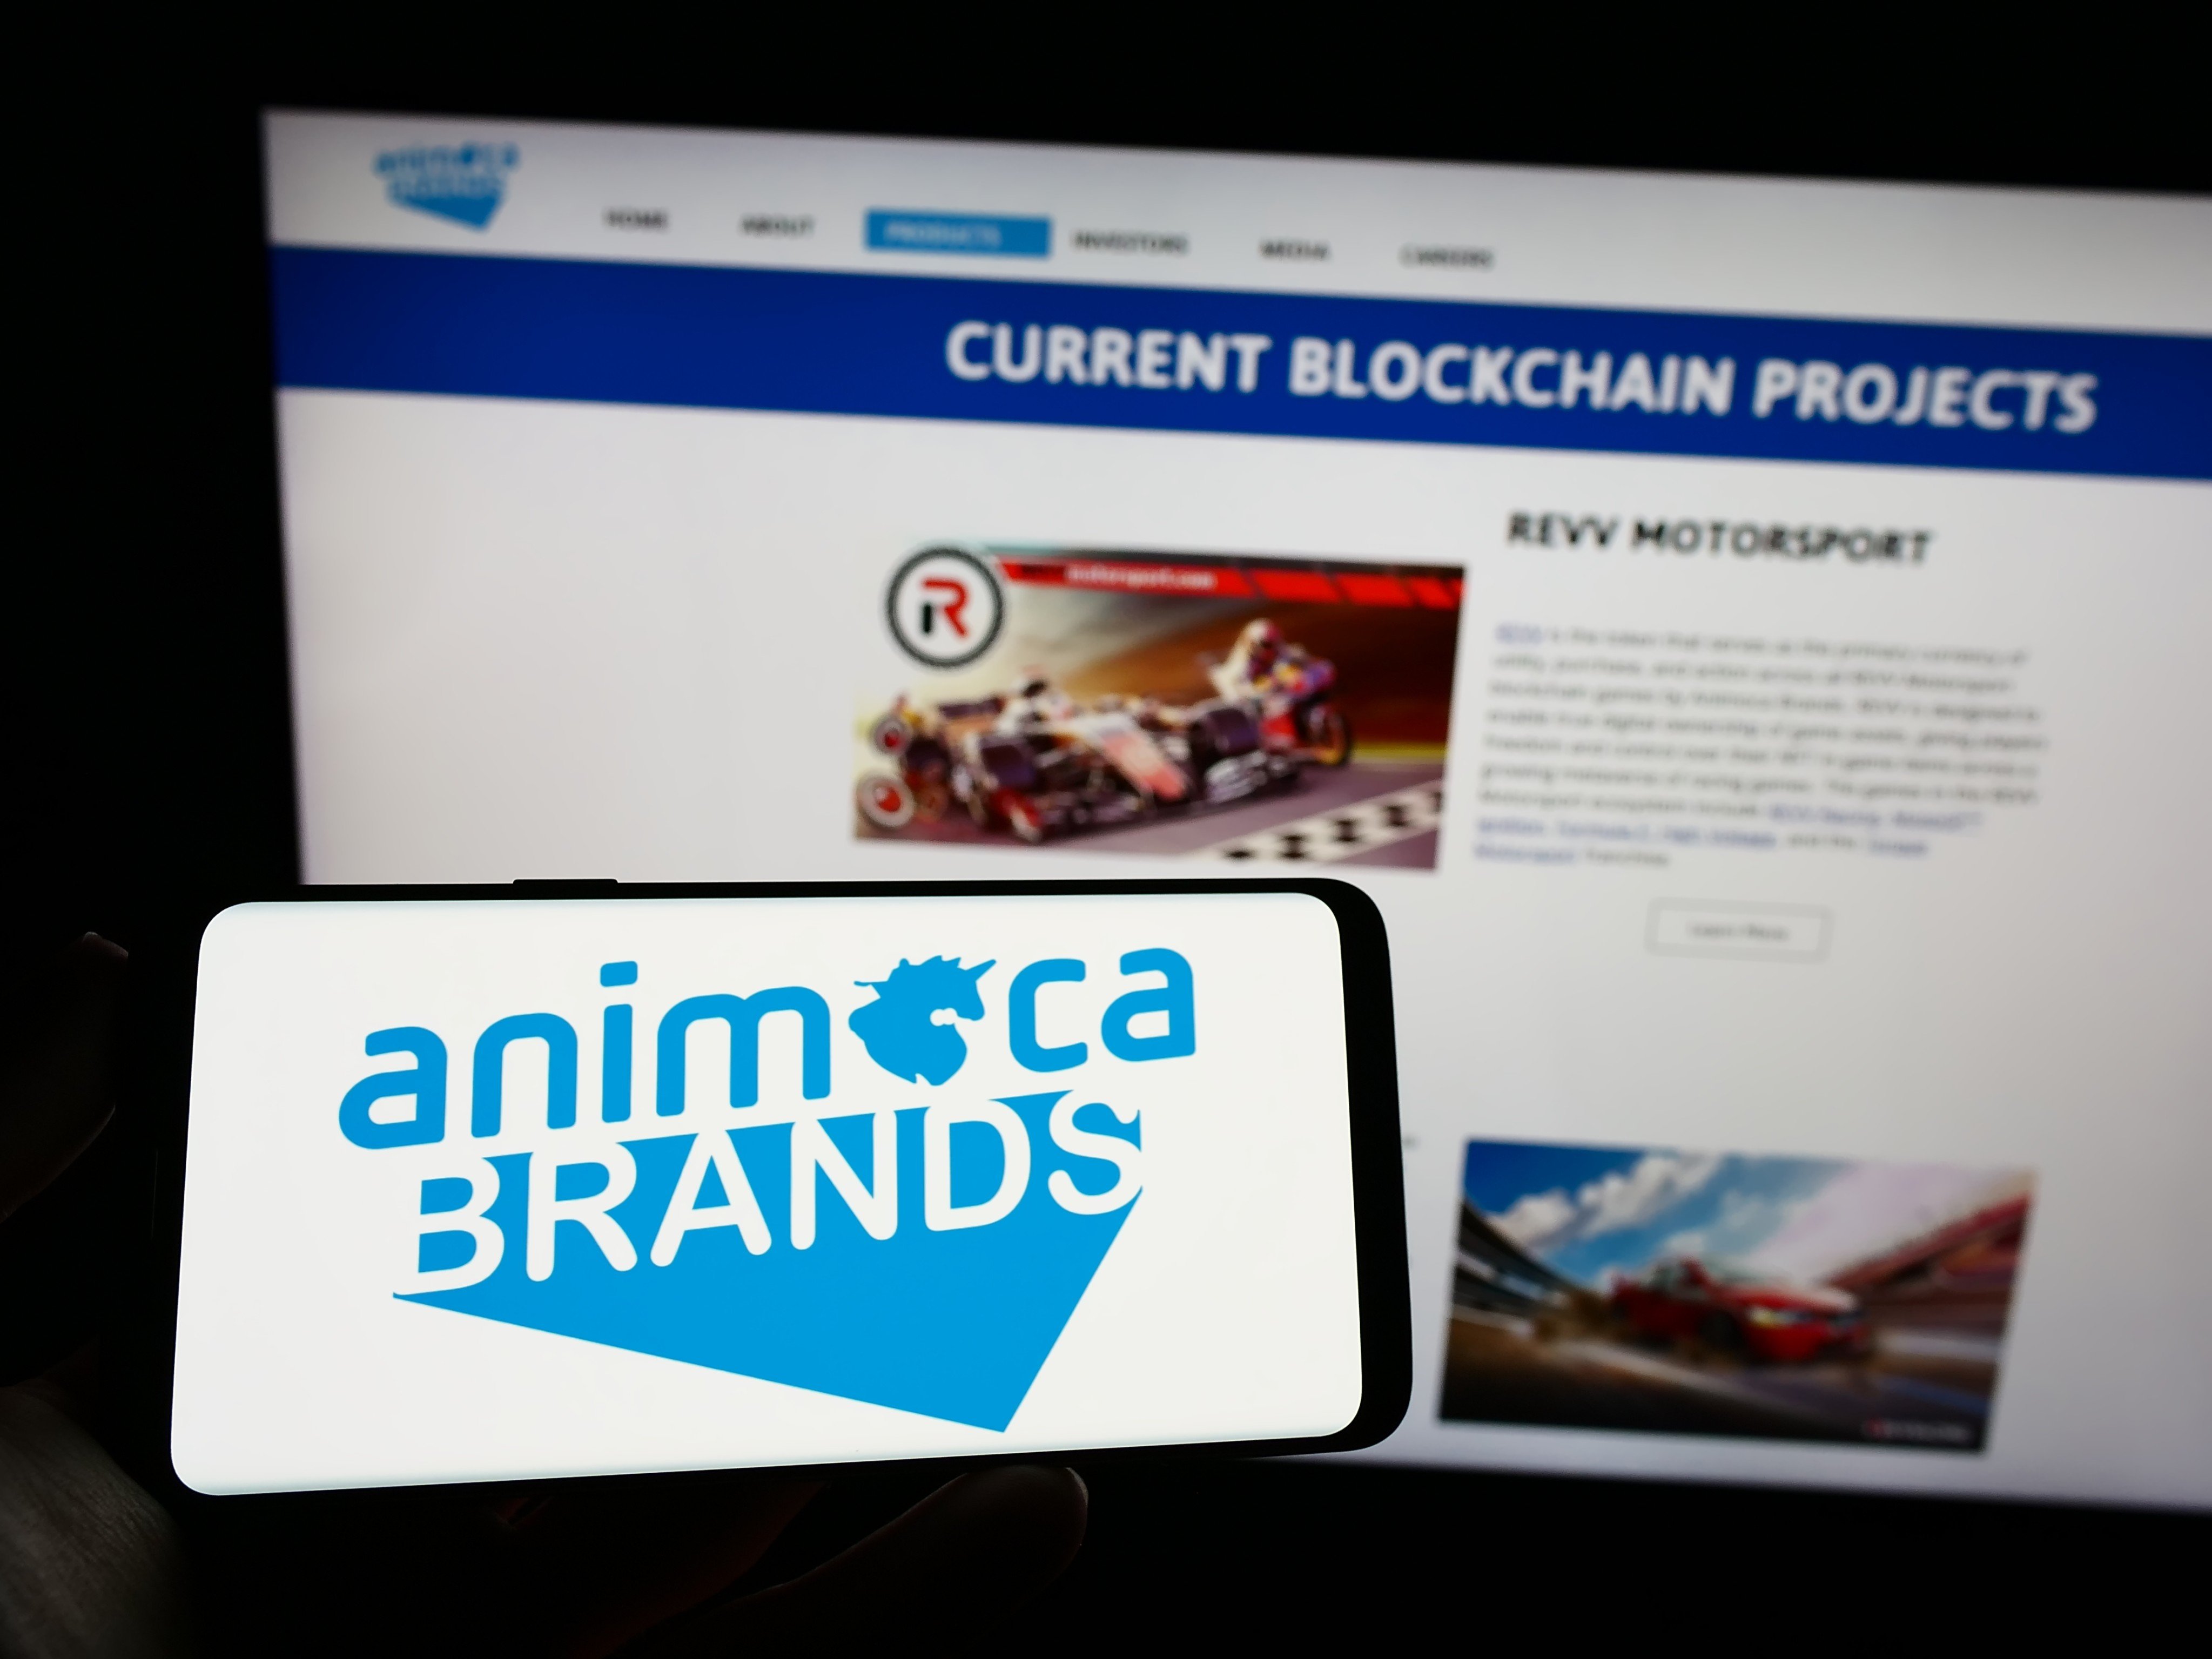 Animoca Brands is the biggest Web3 company in Hong Kong, with a portfolio of more than 400 start-ups. Photo: Shutterstock